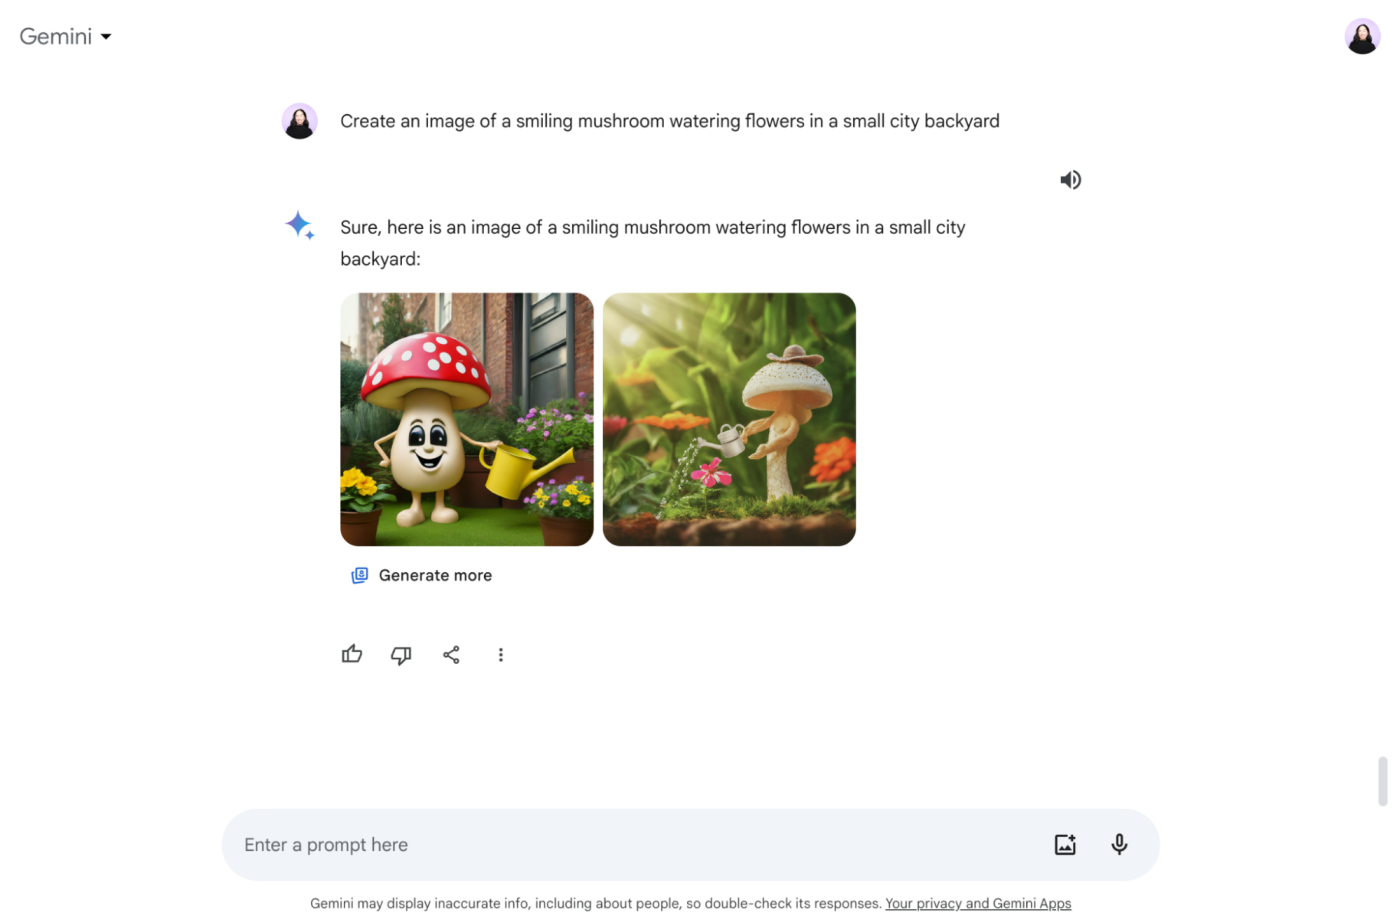 Gemini offering AI-generated two images of a smiling mushroom watering flowers in a small city backyard. 